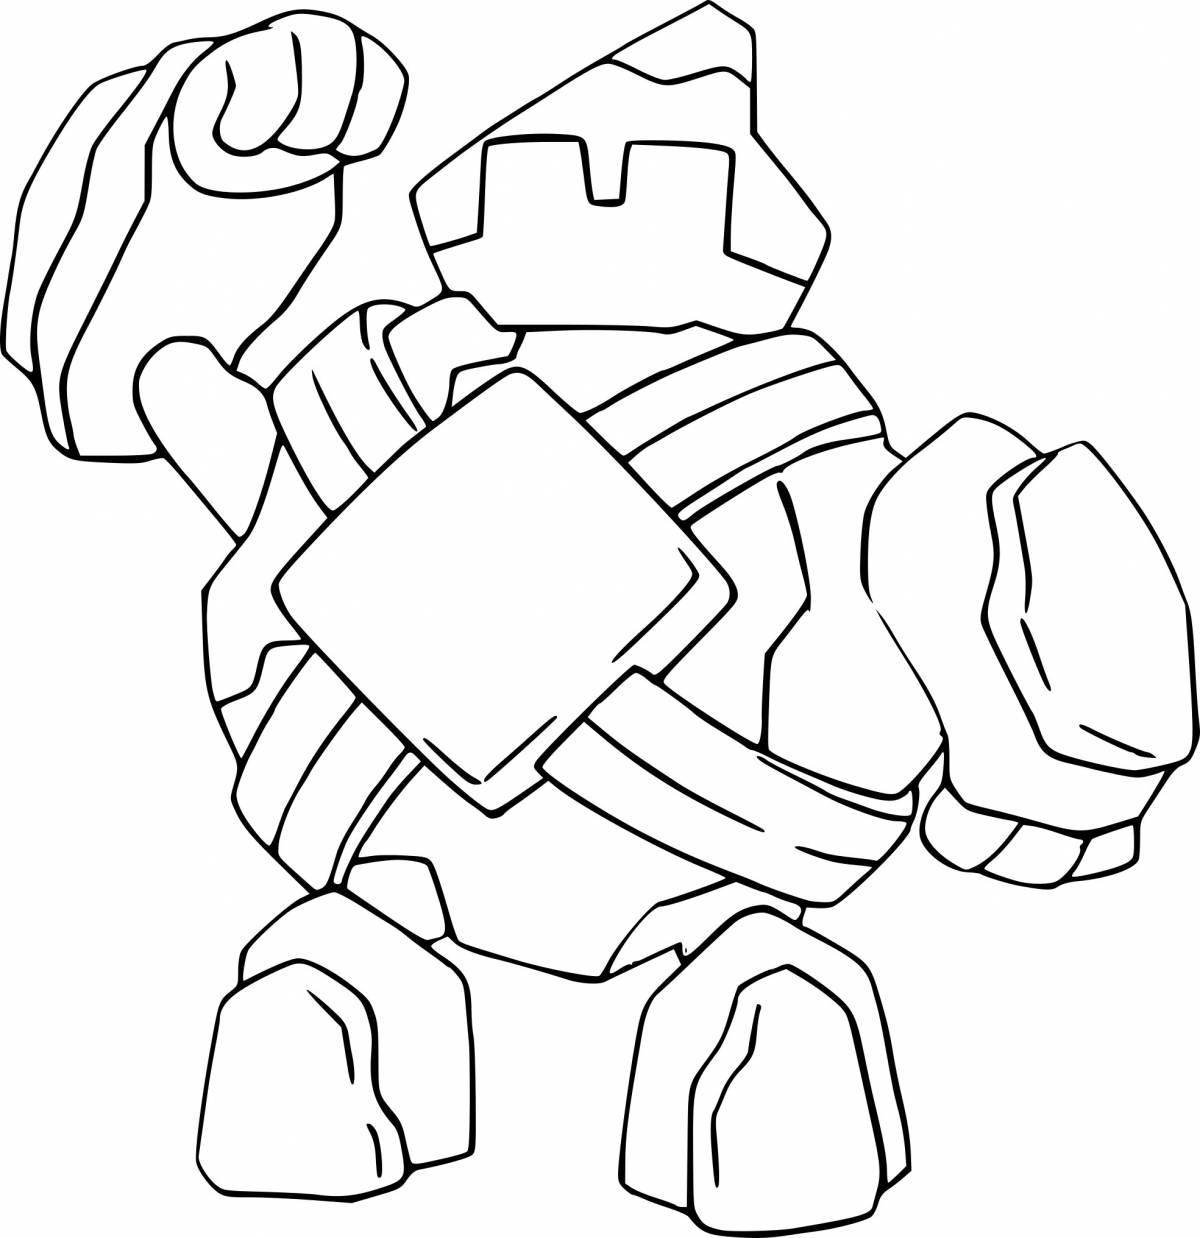 Colorful golem coloring page